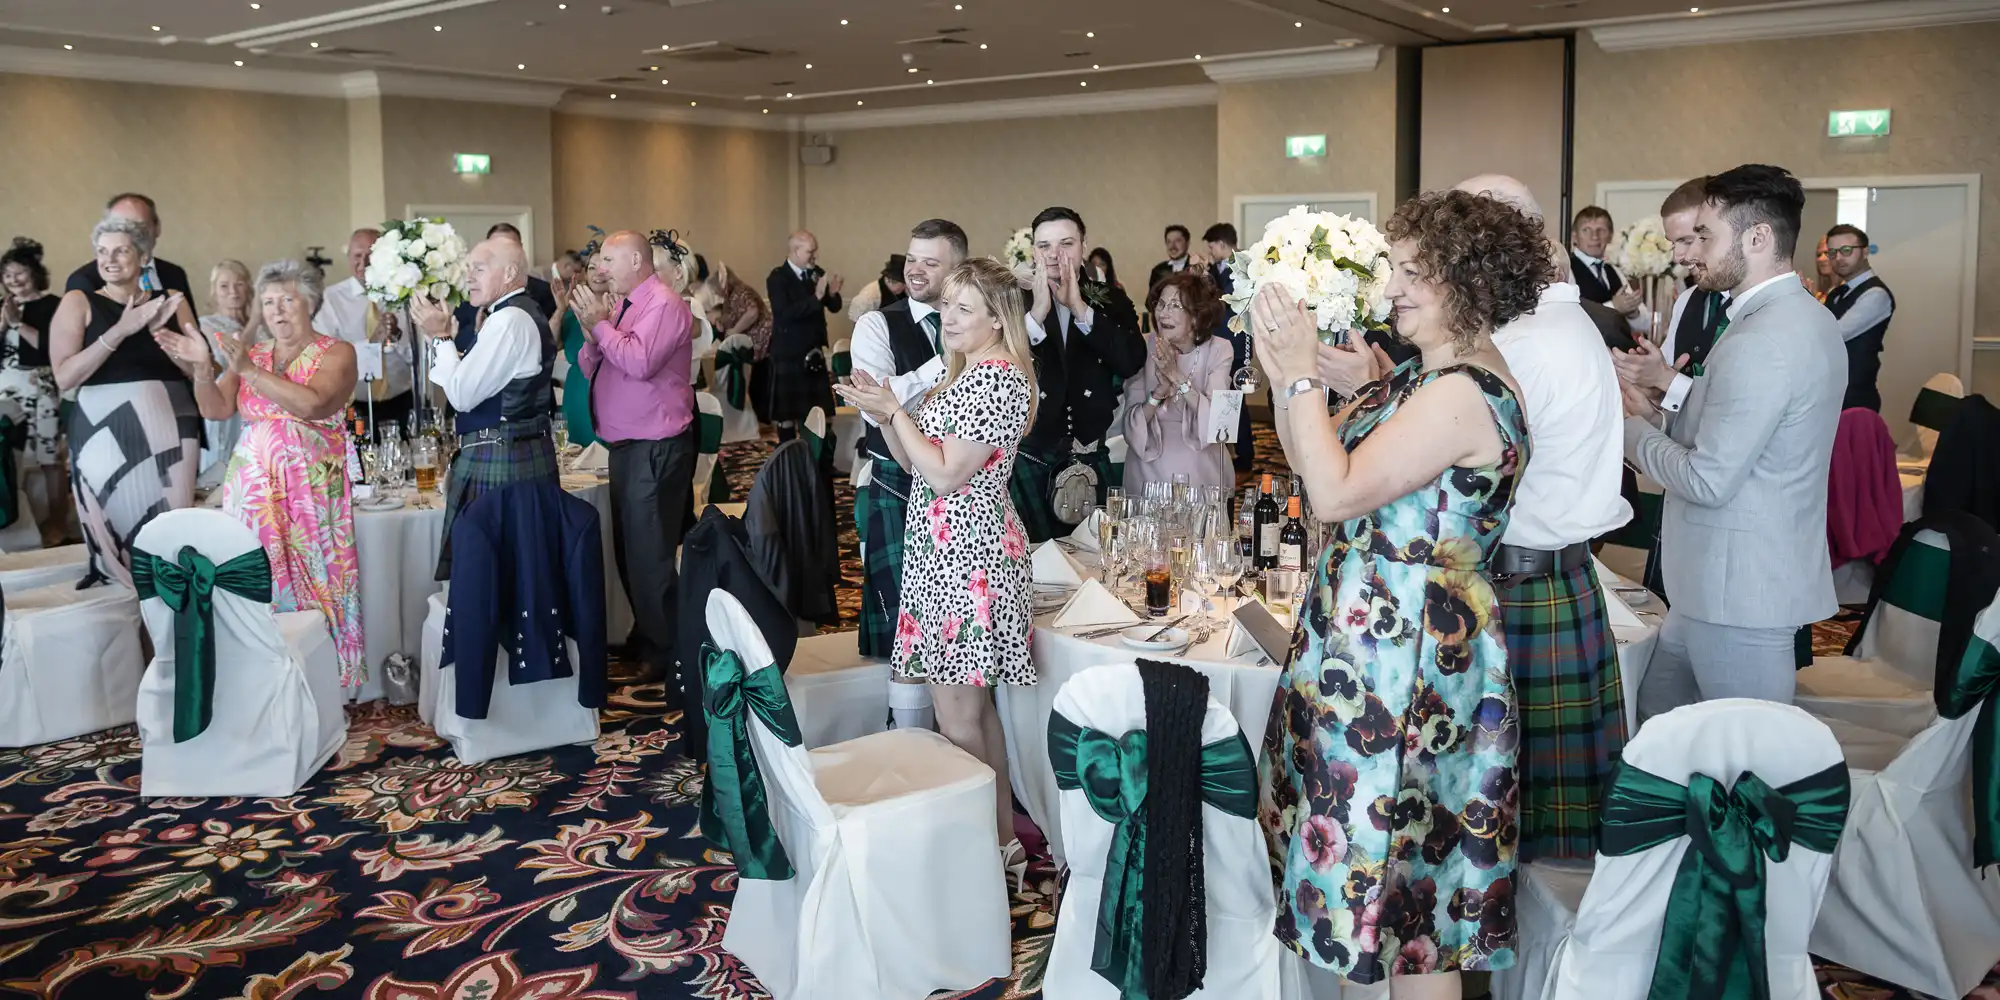 Guests standing and applauding at a wedding reception inside an elegantly decorated room.